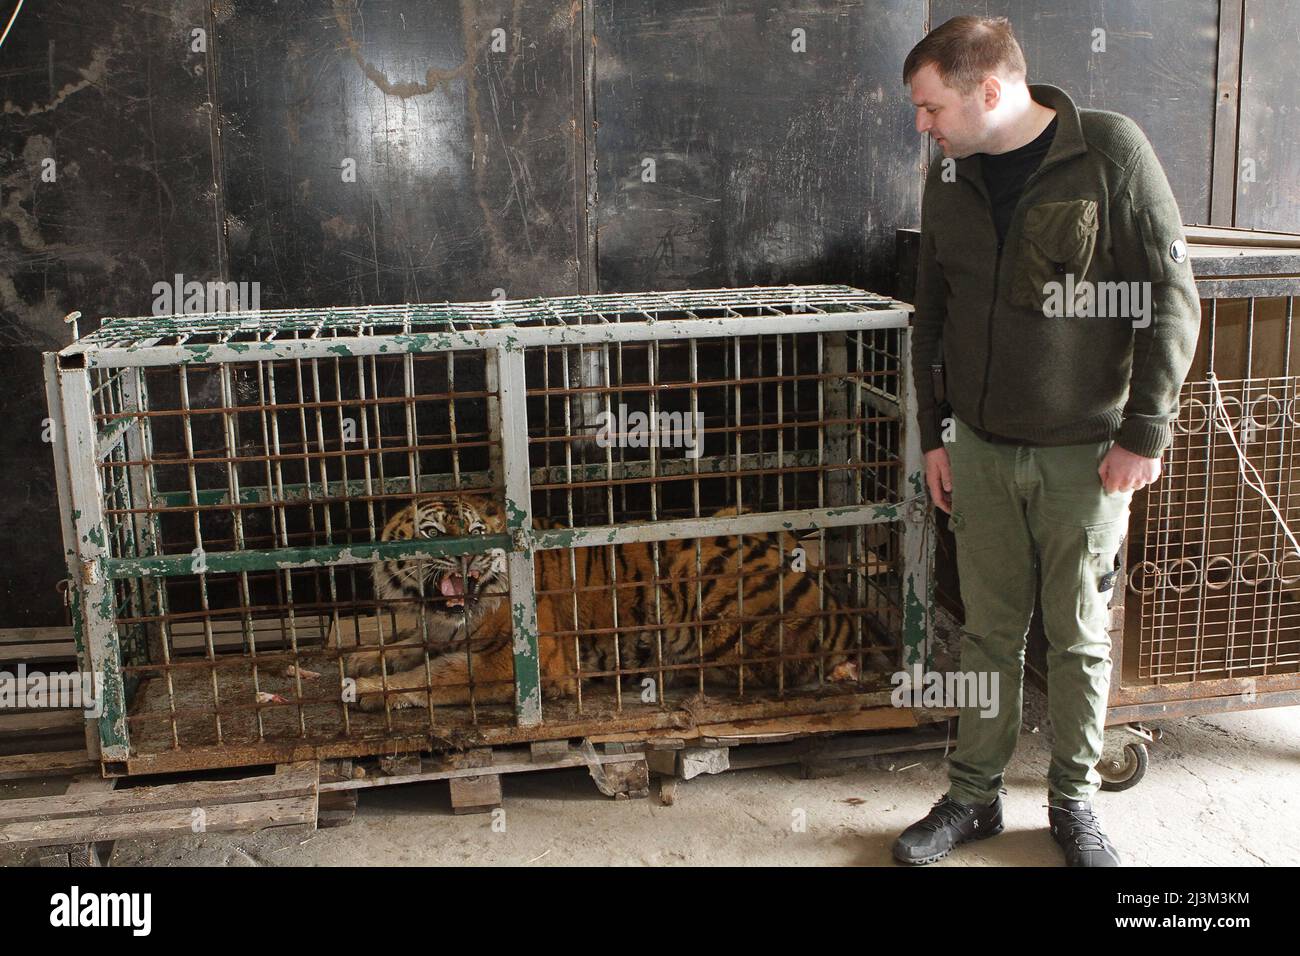 Dnipro, Ukraine. 08th Apr, 2022. Dnipro deputy city head Mykhailo Lysenko stands by a cage with a tiger evacuated from the ruined Kharkiv Feldman Ecopark, Dnipro, central Ukraine, April 8, 2022. Feldman Ecopark “is no more,” founder Alexander Feldman said in a statement on Tuesday after the zoo was “subjected to massive shelling and bombardment” from Russian forces. The statement said the zoo’s “biggest problem” was large predators, such as lions, tigers and bears, which would pose a major danger to humans if they got out of the zoo and roamed free. Feldman said their enclosures were intact bu Stock Photo